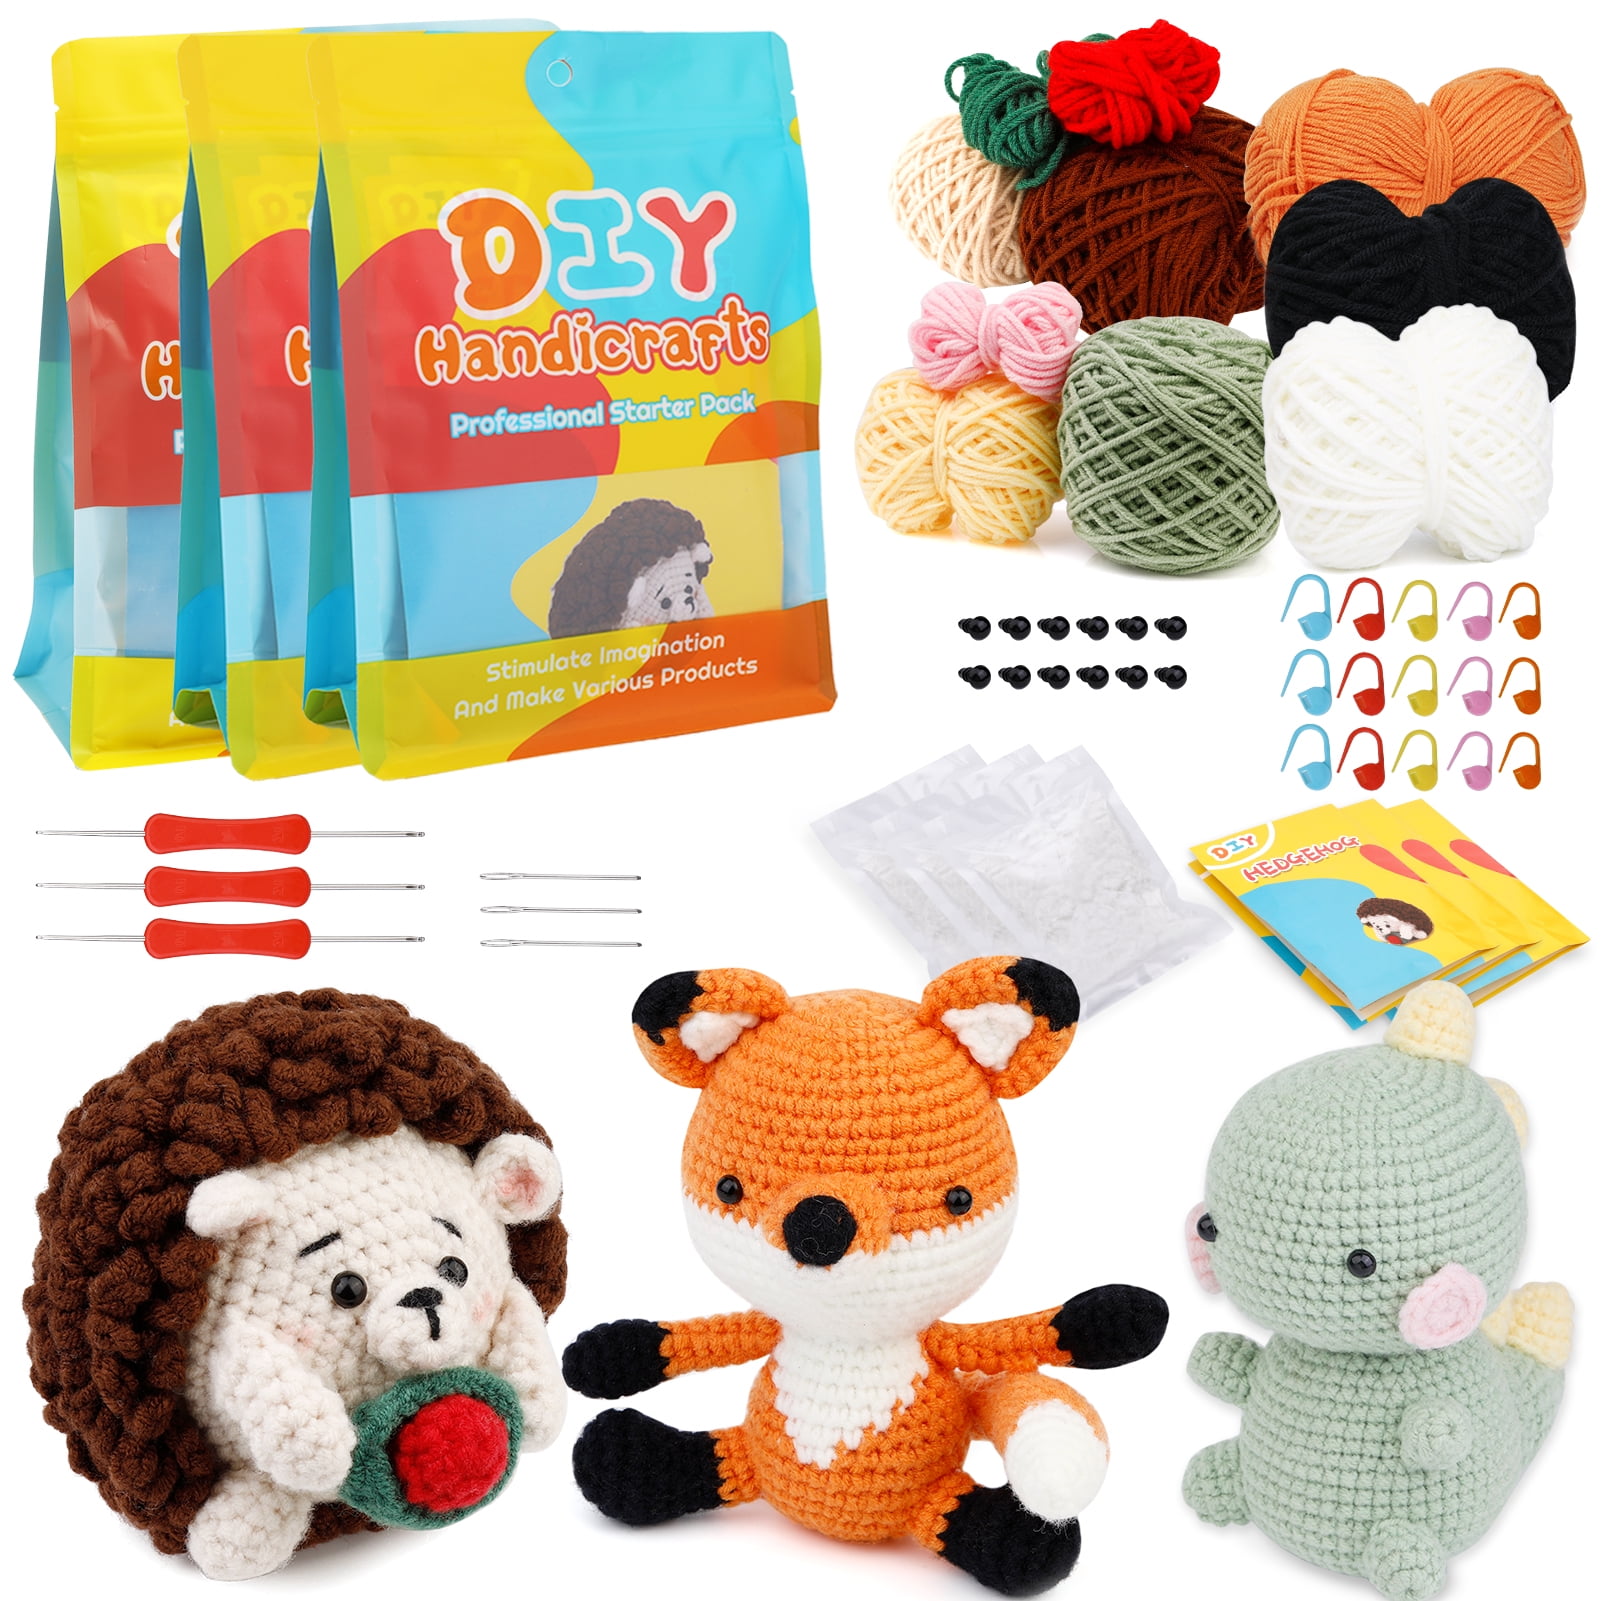 PLWCAMI Crochet Kit for Beginners Crochet Starter Kit for Adults Knitting  Kit to Make 3 PCS Animals Learn to Crochet with Step-by-Step